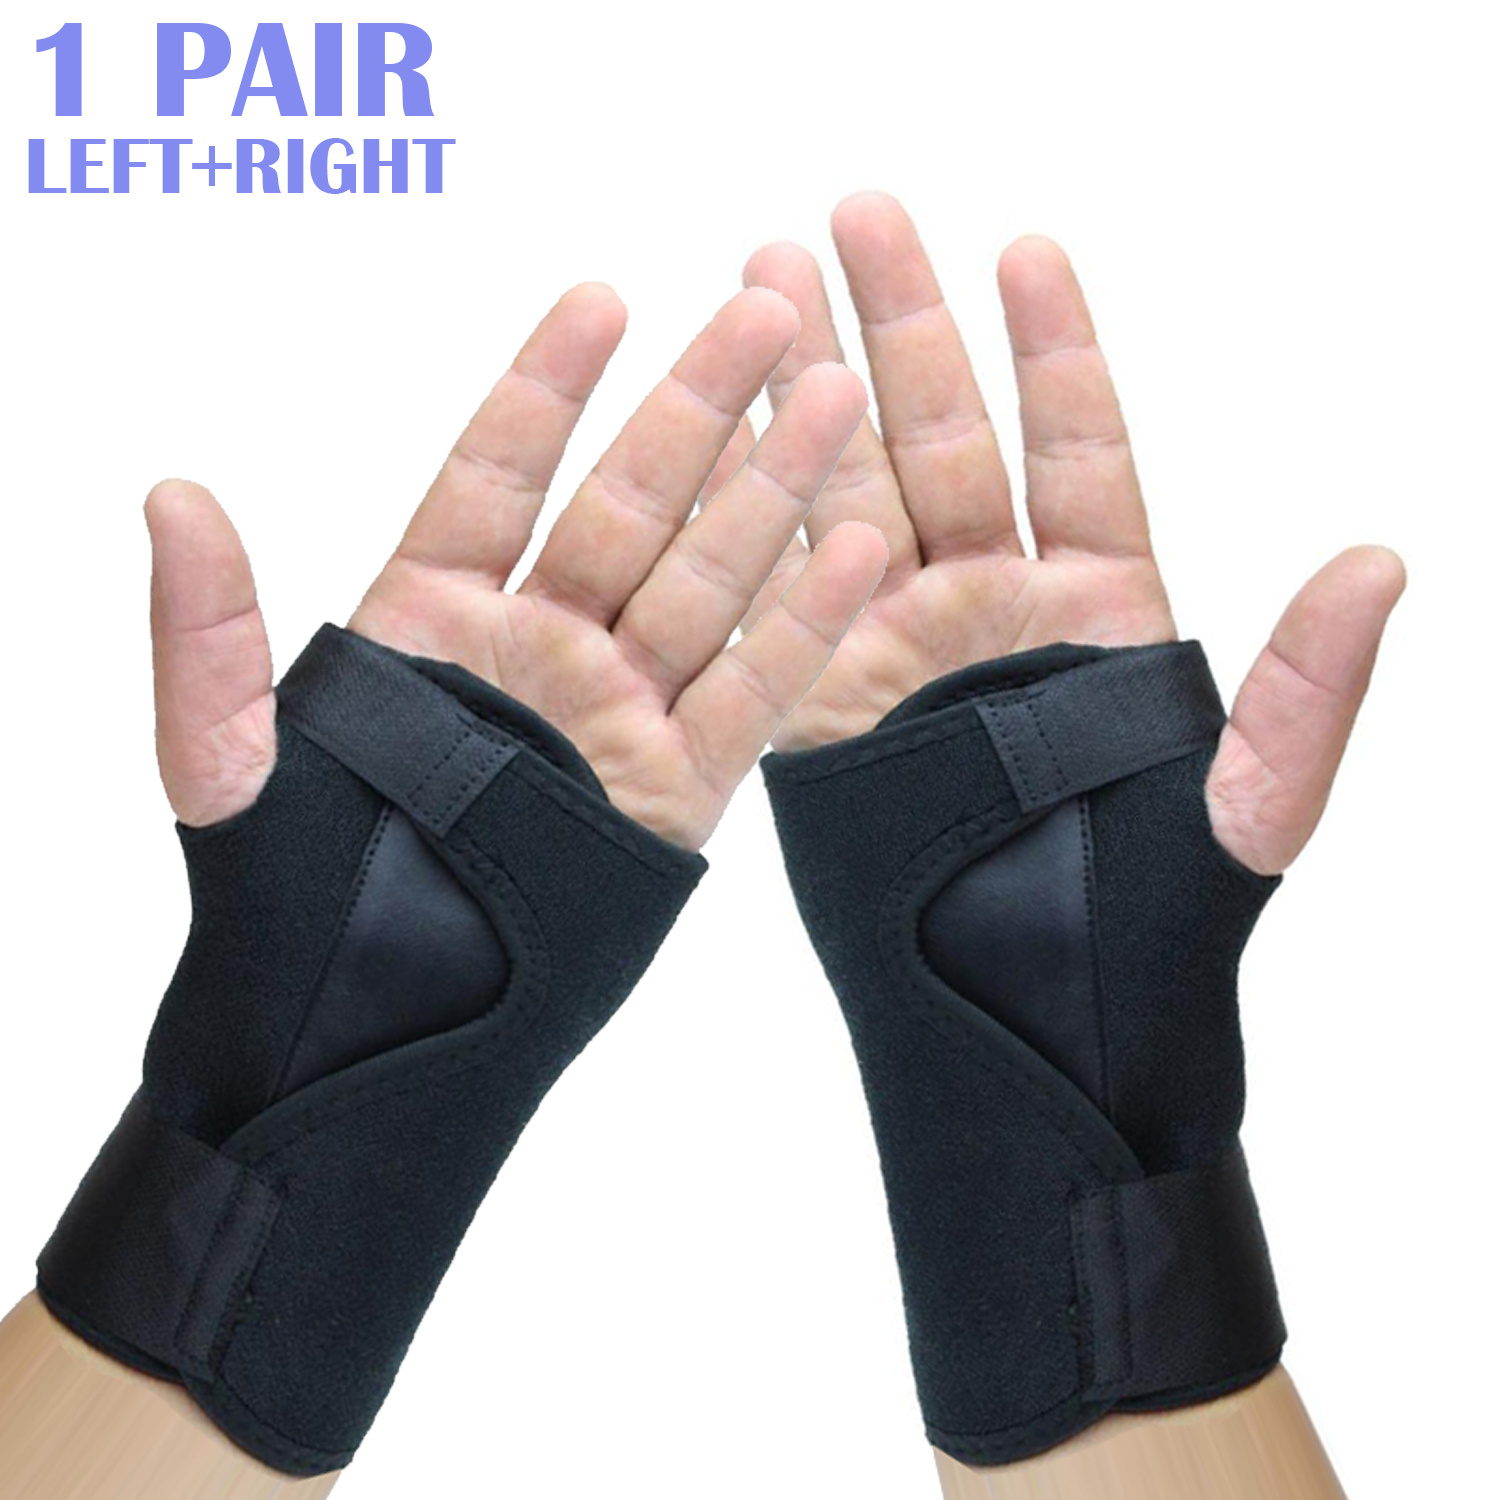 2 Pieces Carpal Tunnel Wrist Braces for Night Wrist Sleep Support